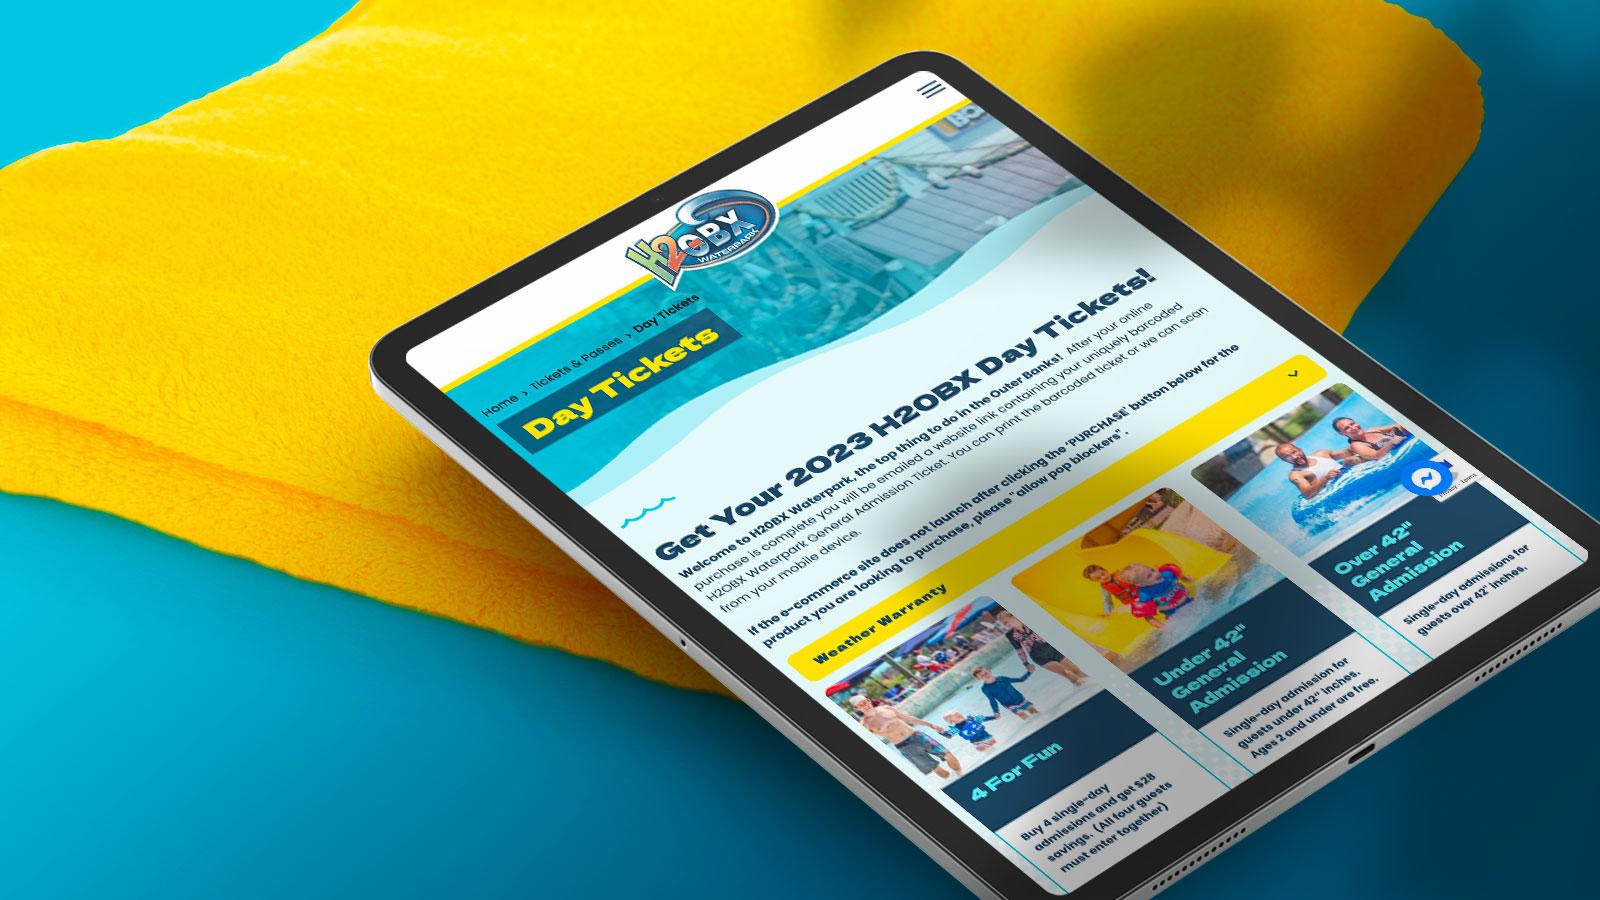 H2OBX Waterpark | Day Tickets page on tablet